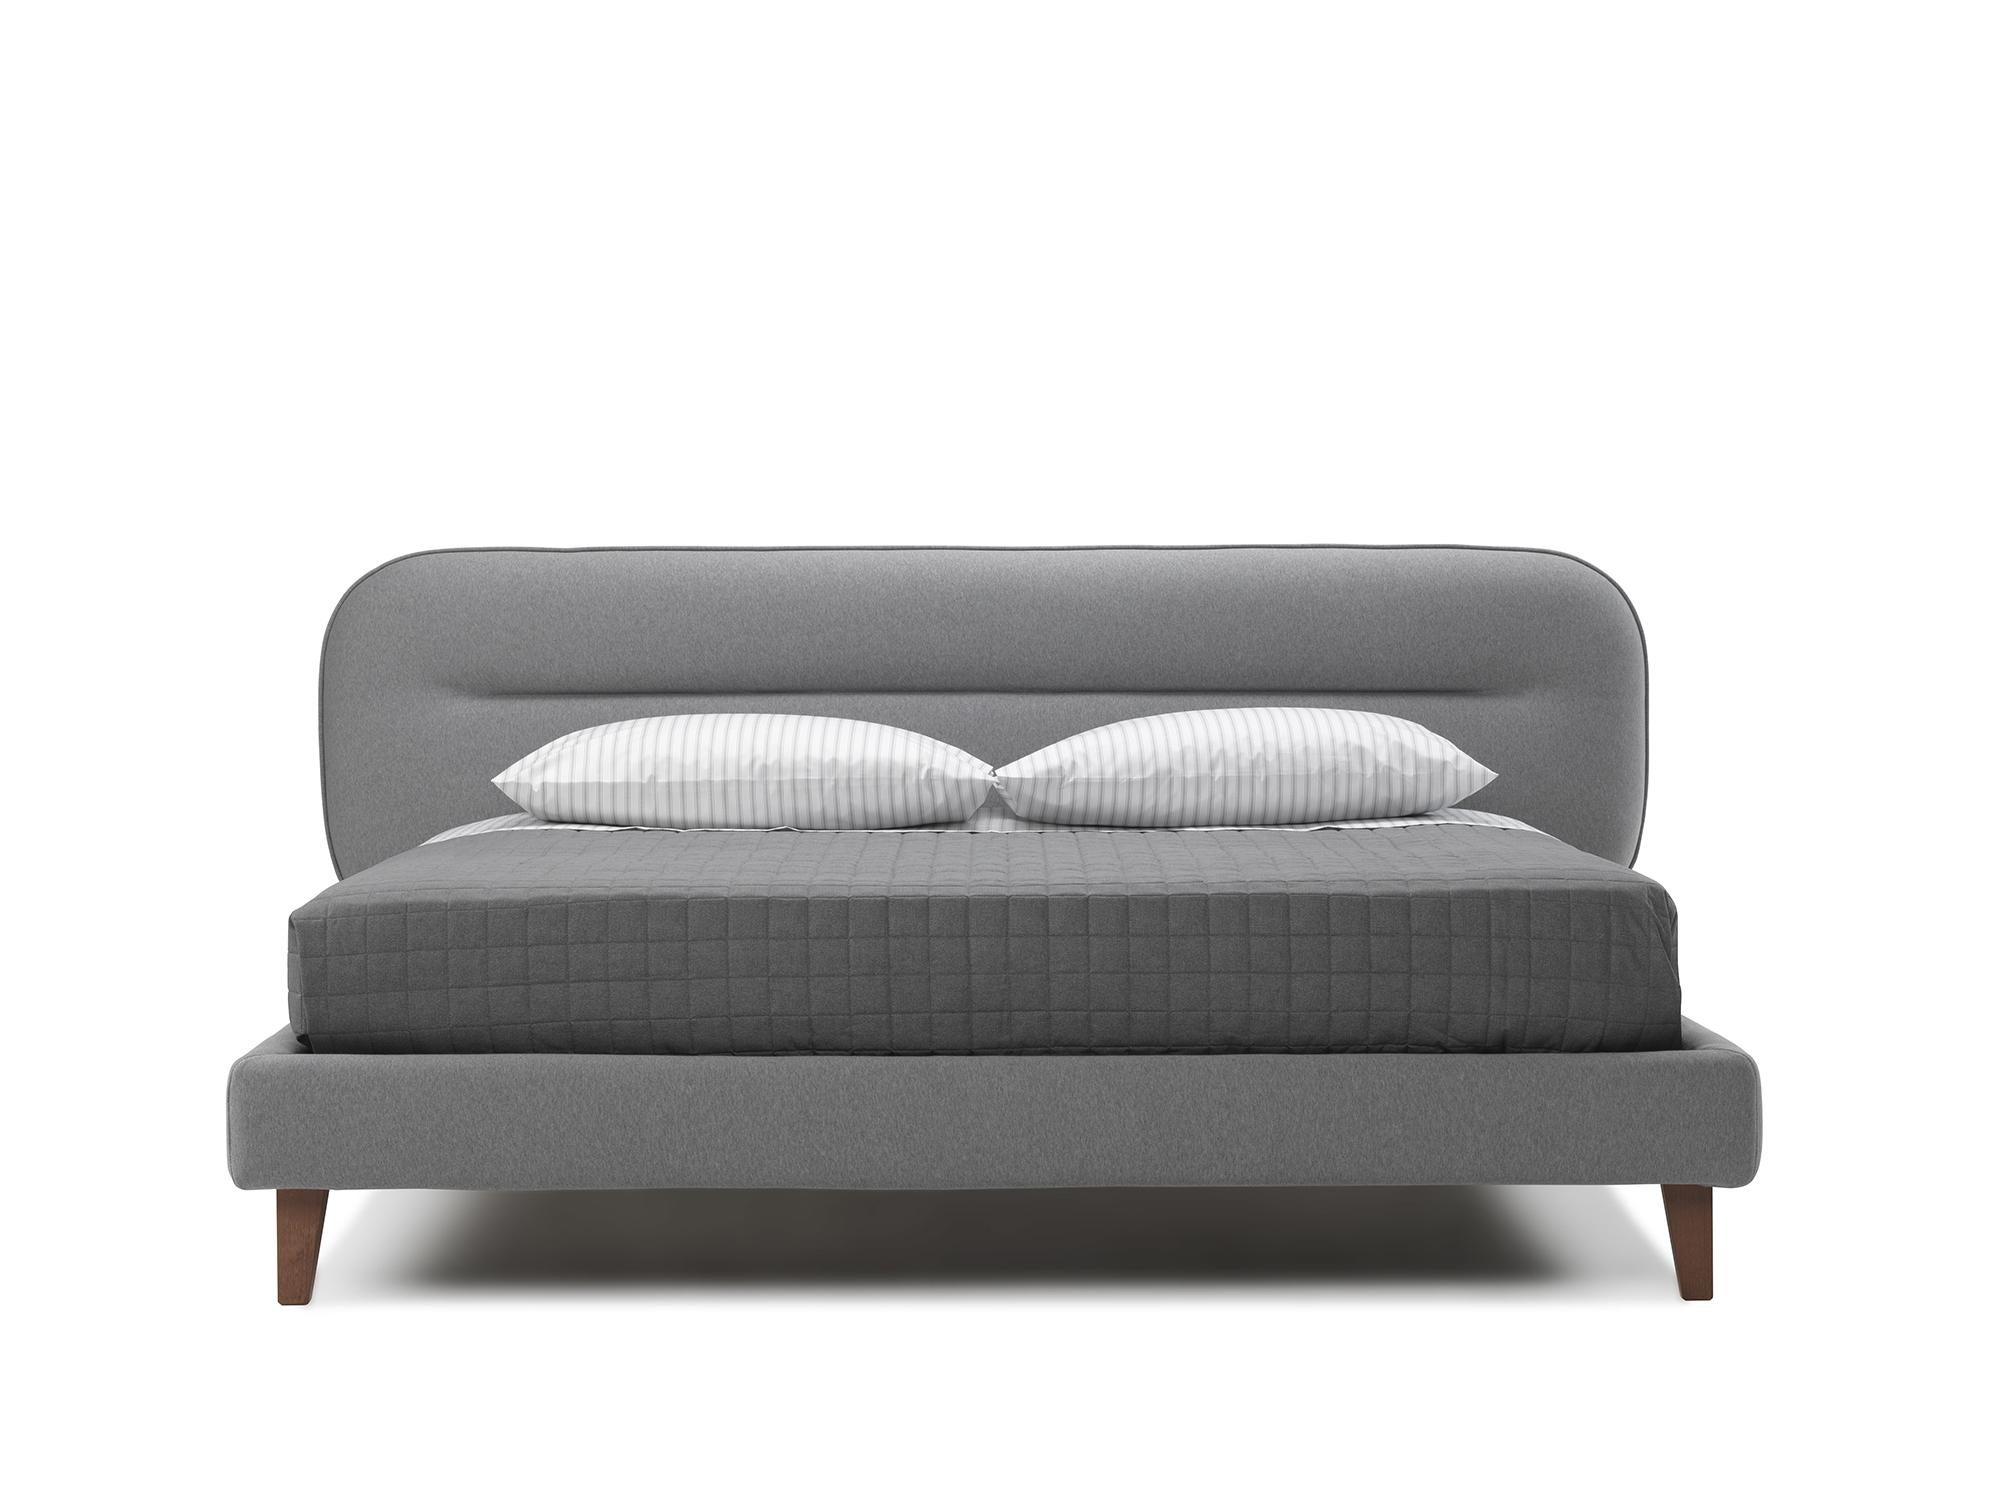 Bed with a young and trendy line for style-conscious customers. It evokes the forms of the 1960s and 1970s when the Italian design reached its pinnacle. The aesthetical detail of the upholstered headboard contributes to a beautiful and unique item: